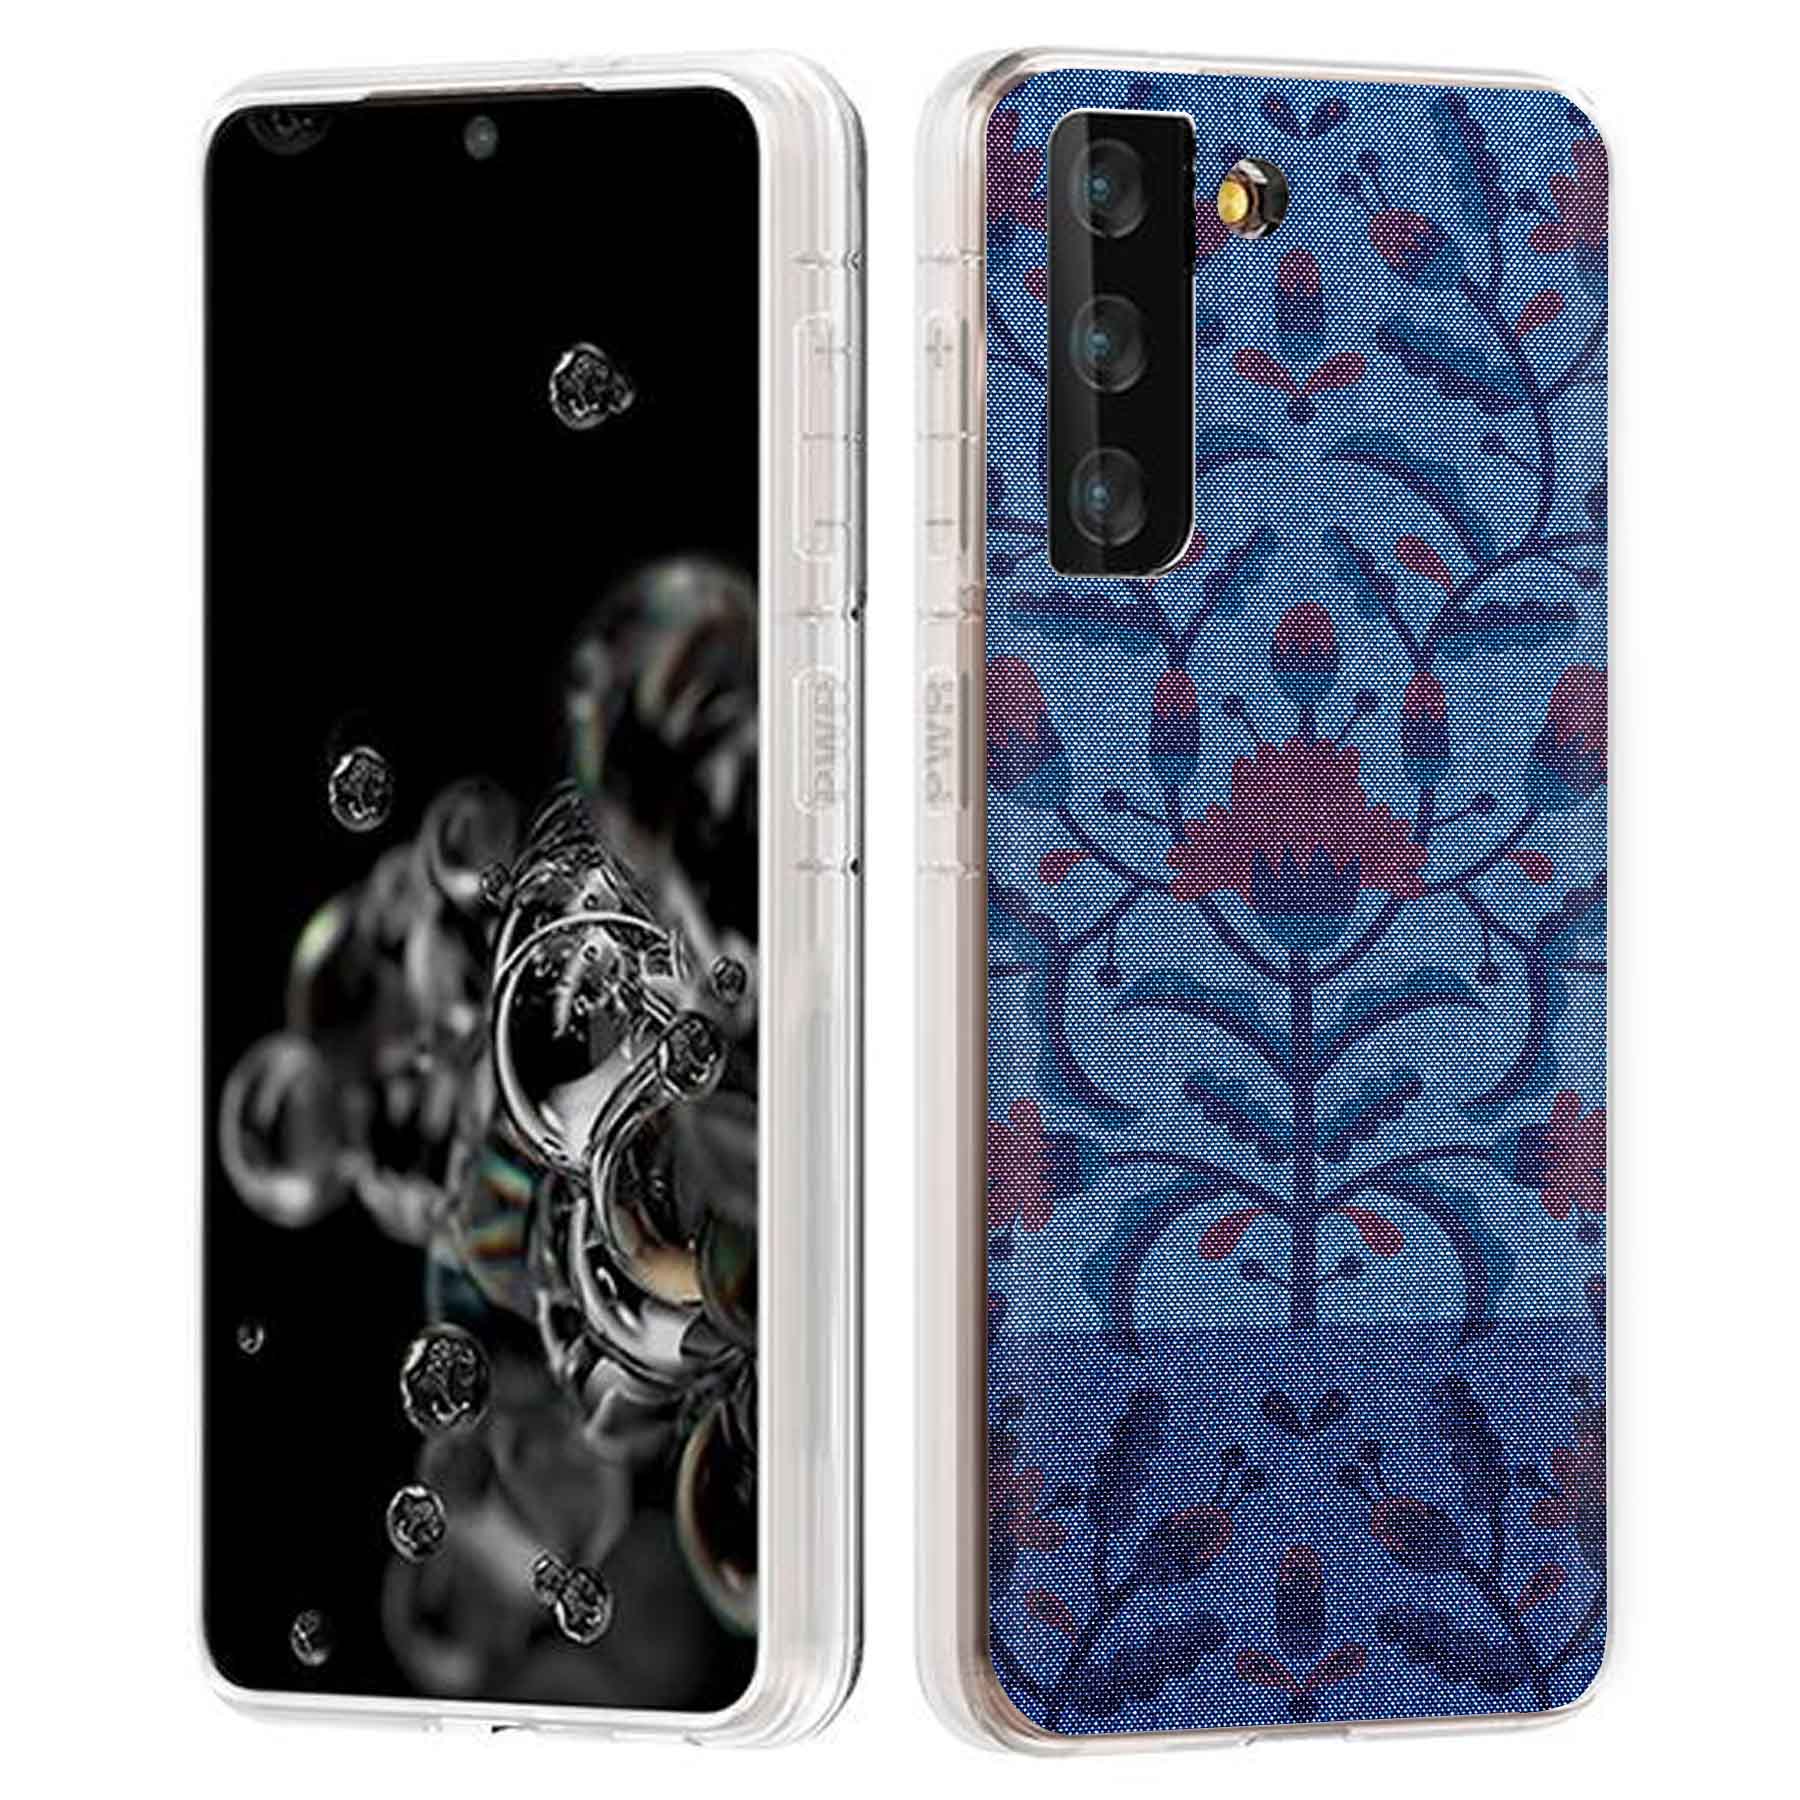 TalkingCase Slim Phone Case Compatible for Samsung Galaxy S21 5G, S30,(Not S21+,S21 Ultra),Floral Fabric Print,Lightweight,Flexible,Soft, USA - image 1 of 7